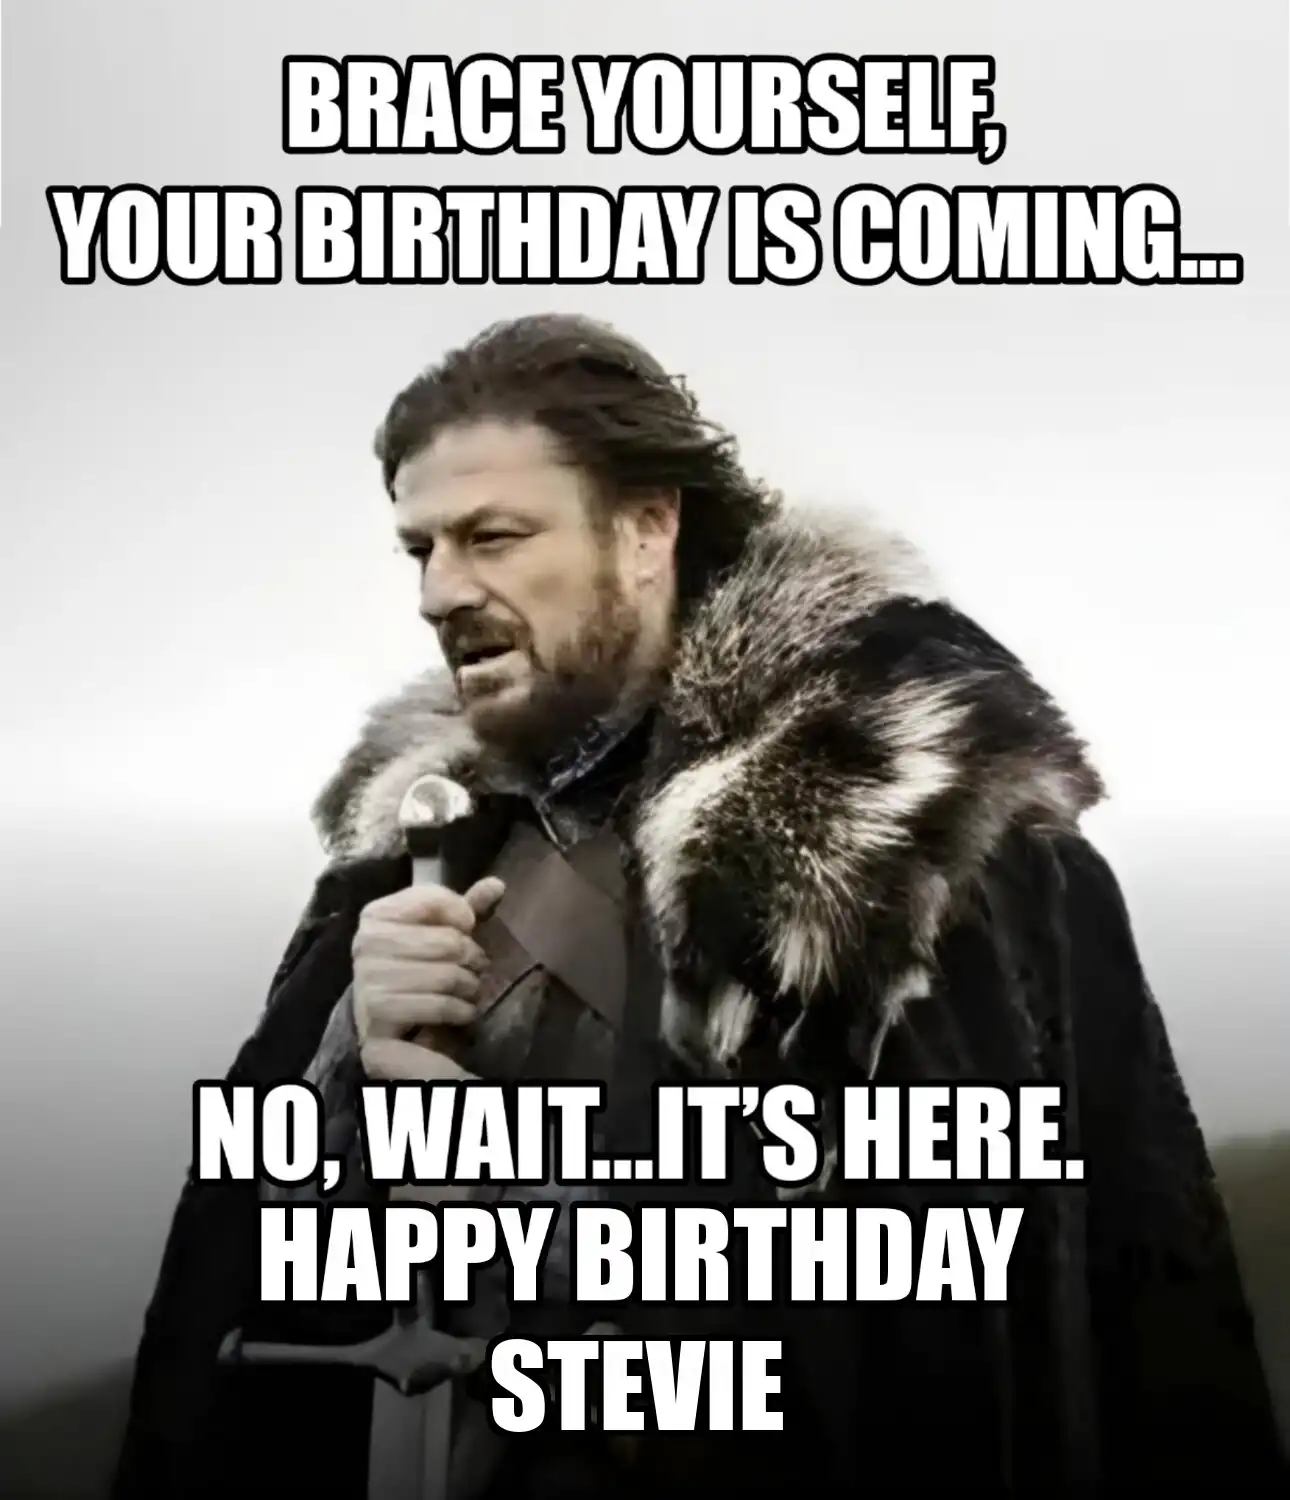 Happy Birthday Stevie Brace Yourself Your Birthday Is Coming Meme